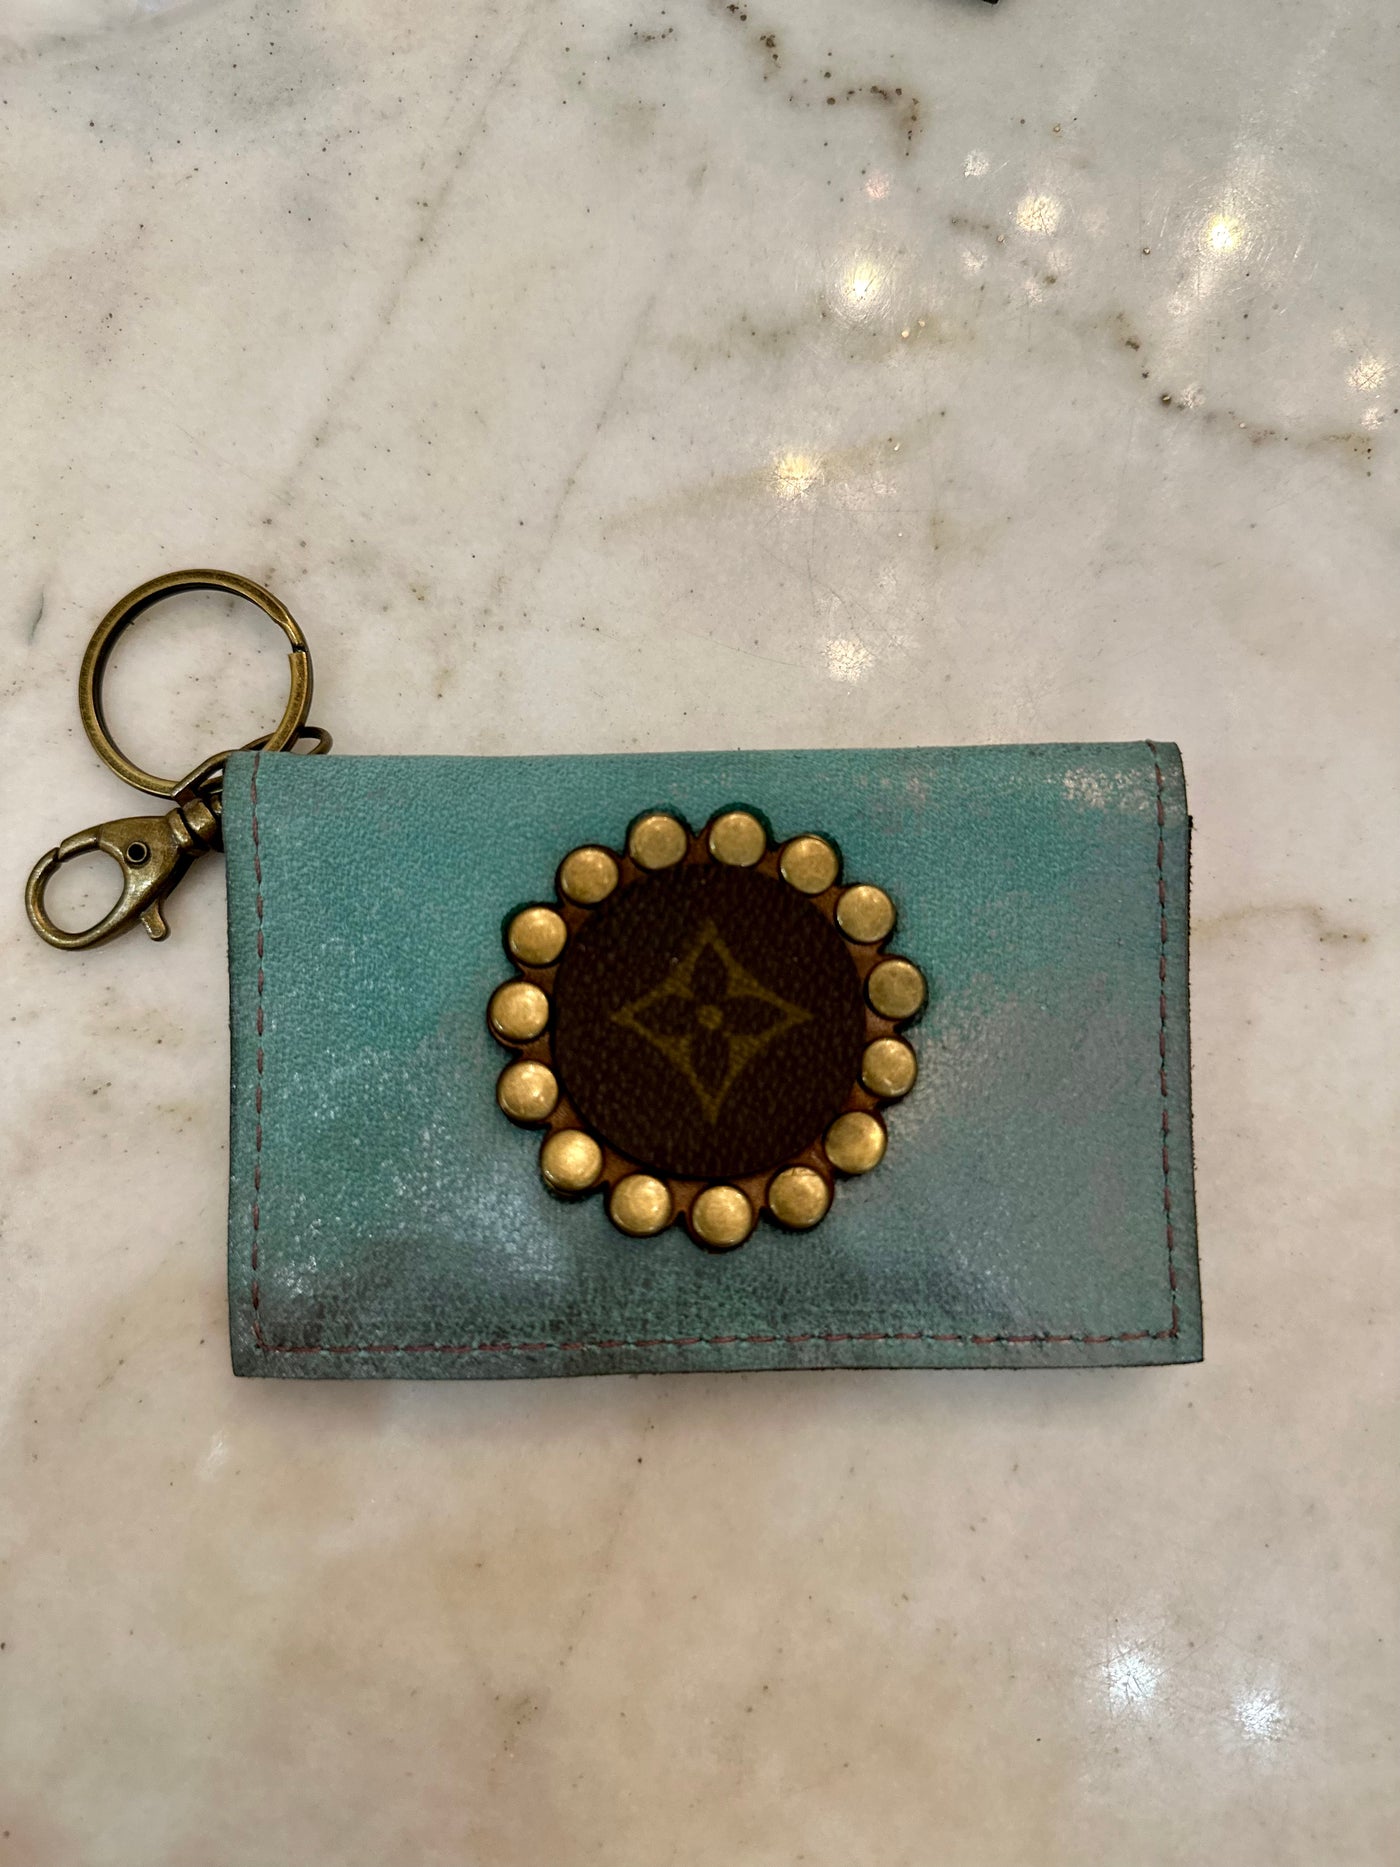 Turquoise Upcycled Wallet/Credit Card Holder